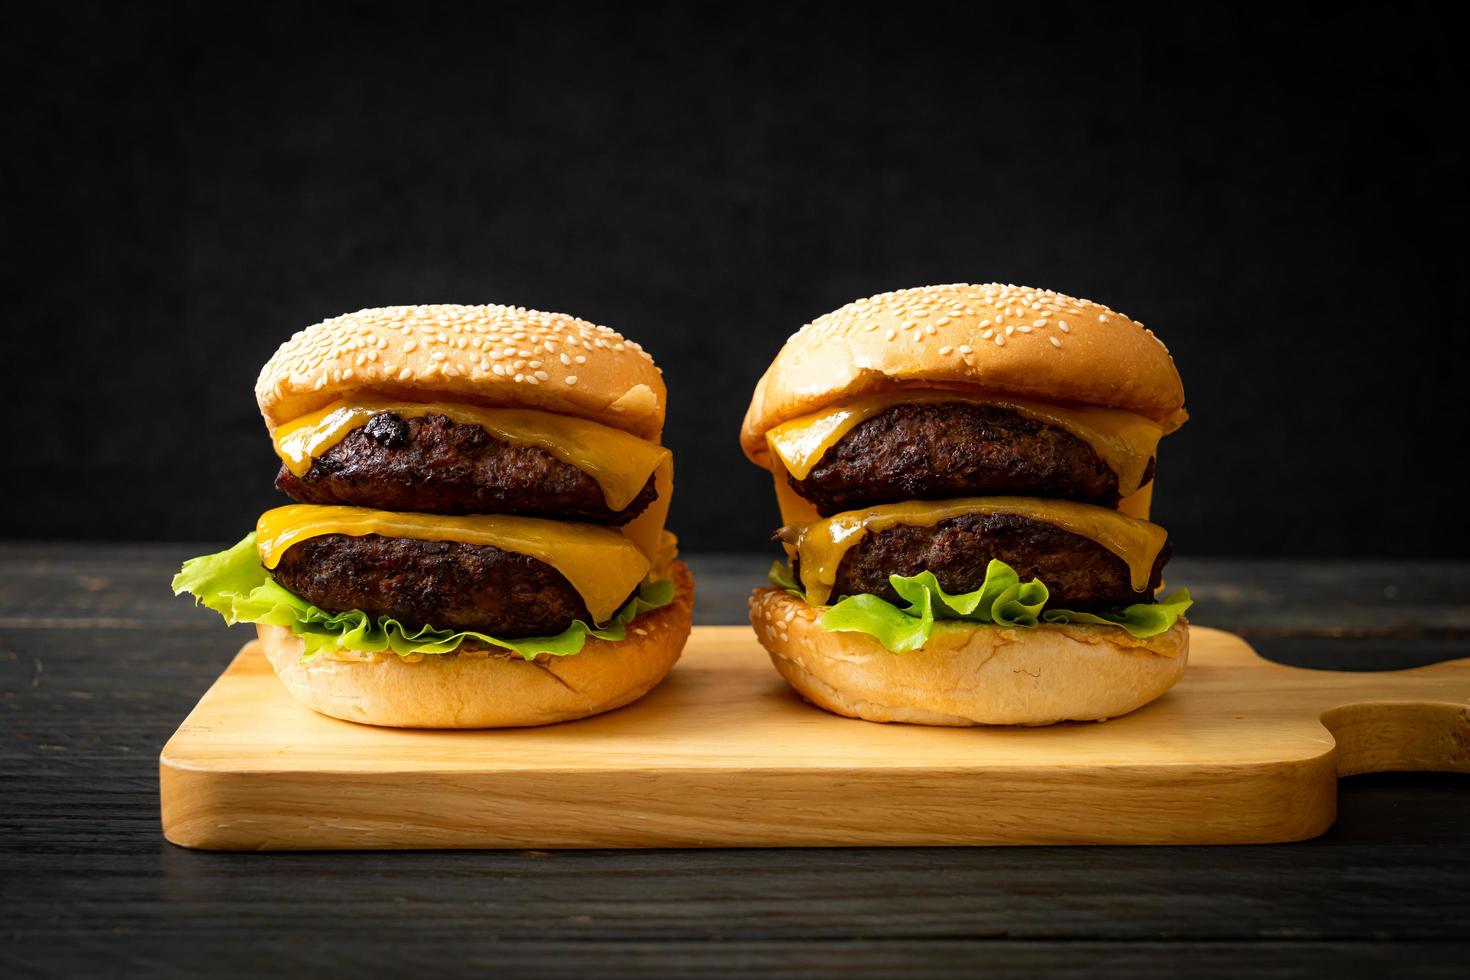 Hamburger or beef burgers with cheese - unhealthy food style photo